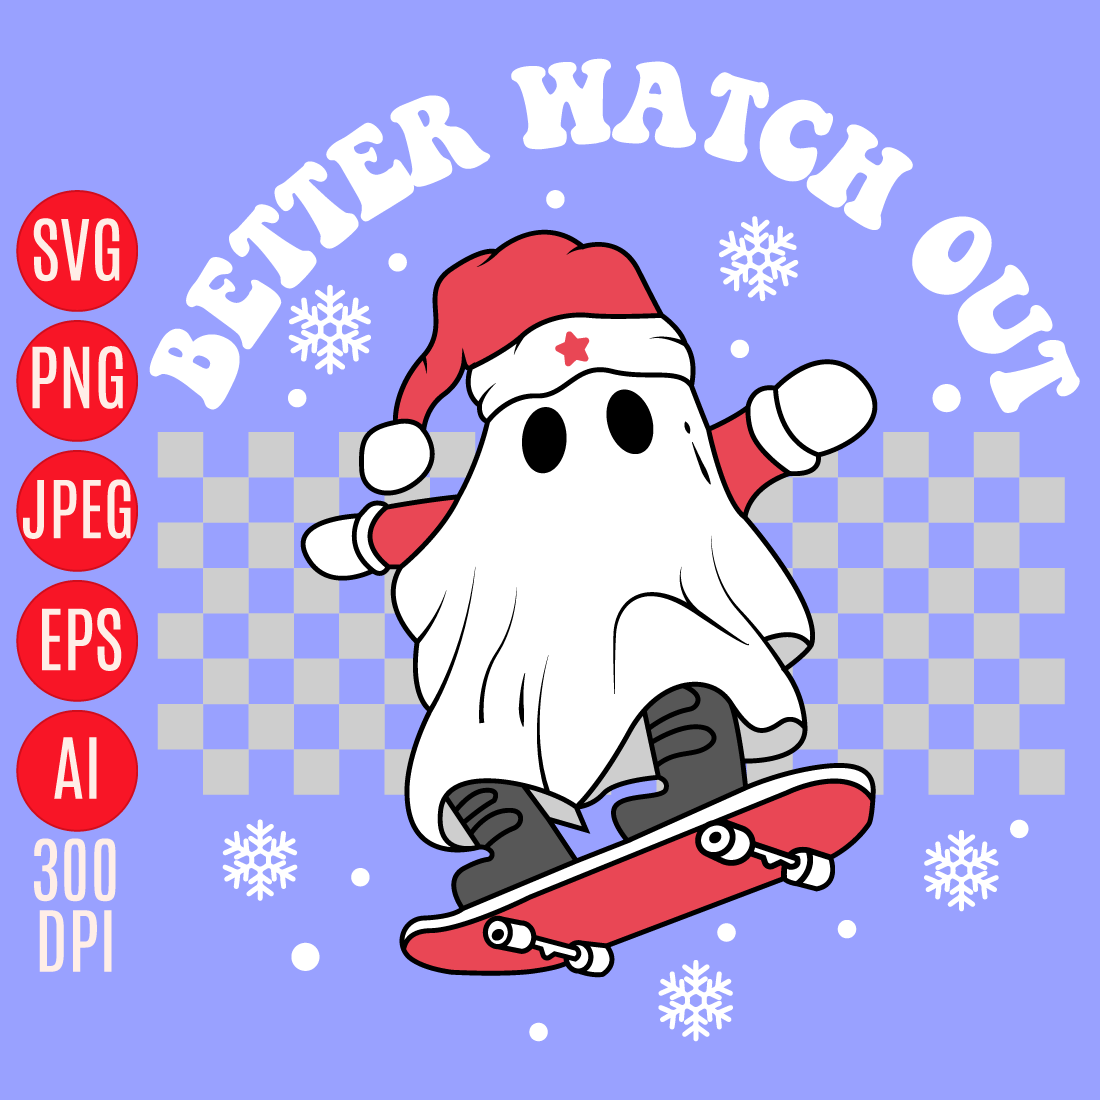 Better Watch out Christmas Ghost Retro Design cover image.